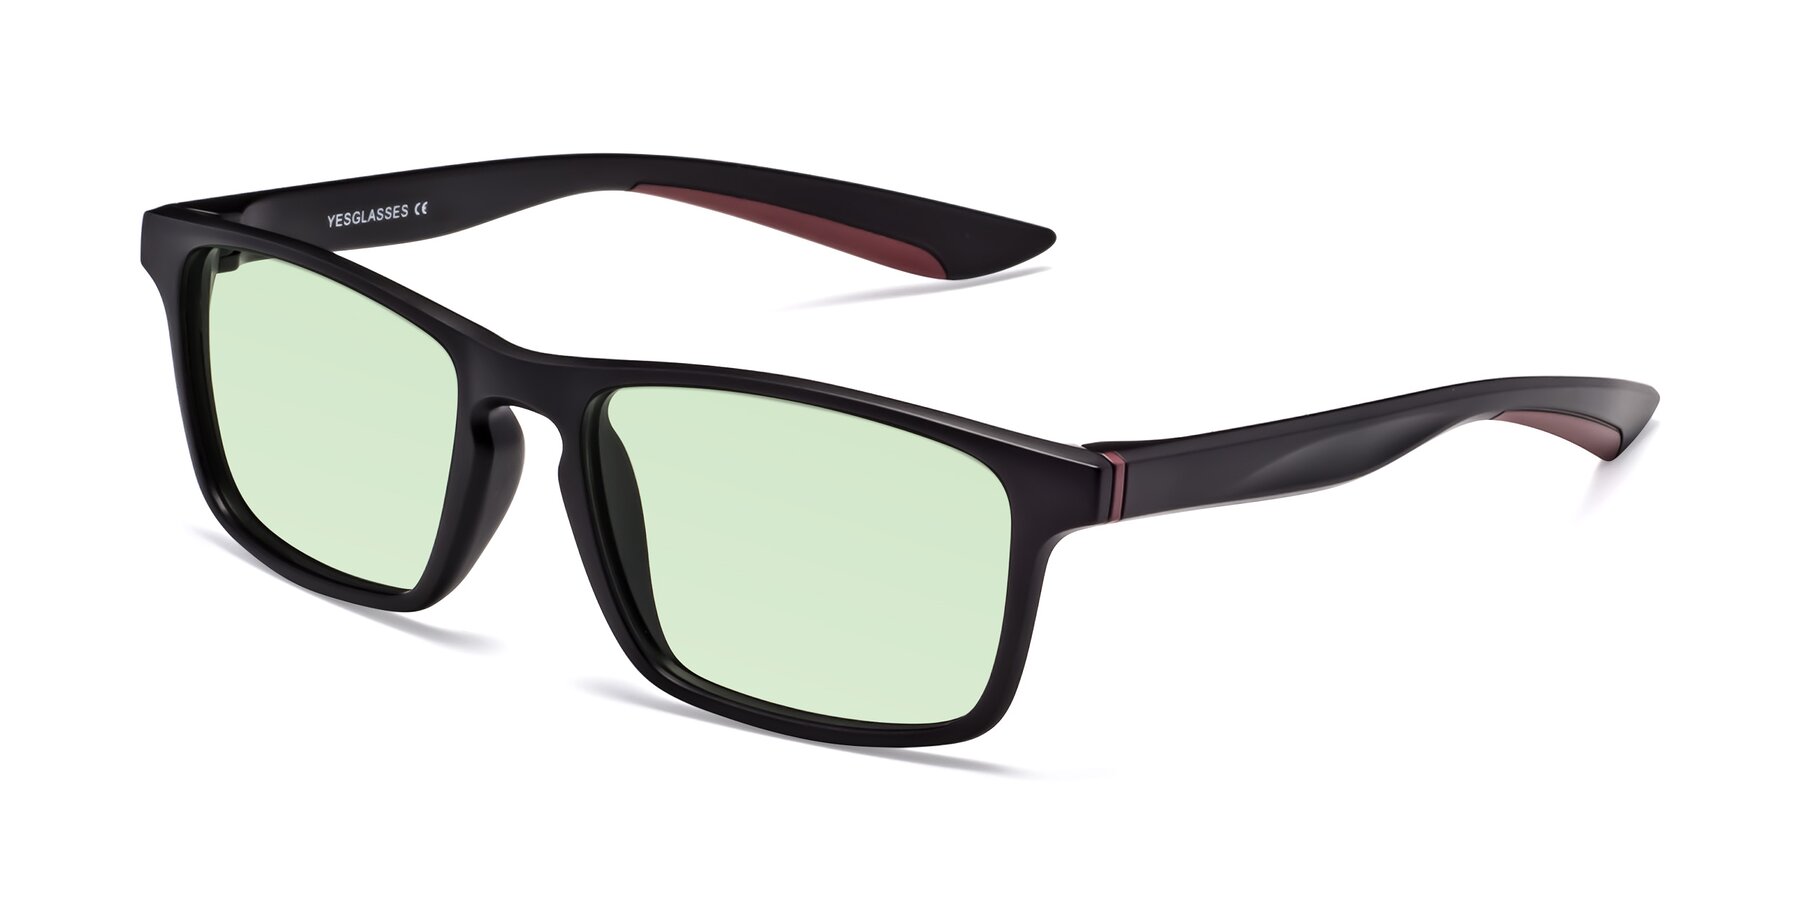 Angle of Passion in Matte Black-Wine with Light Green Tinted Lenses